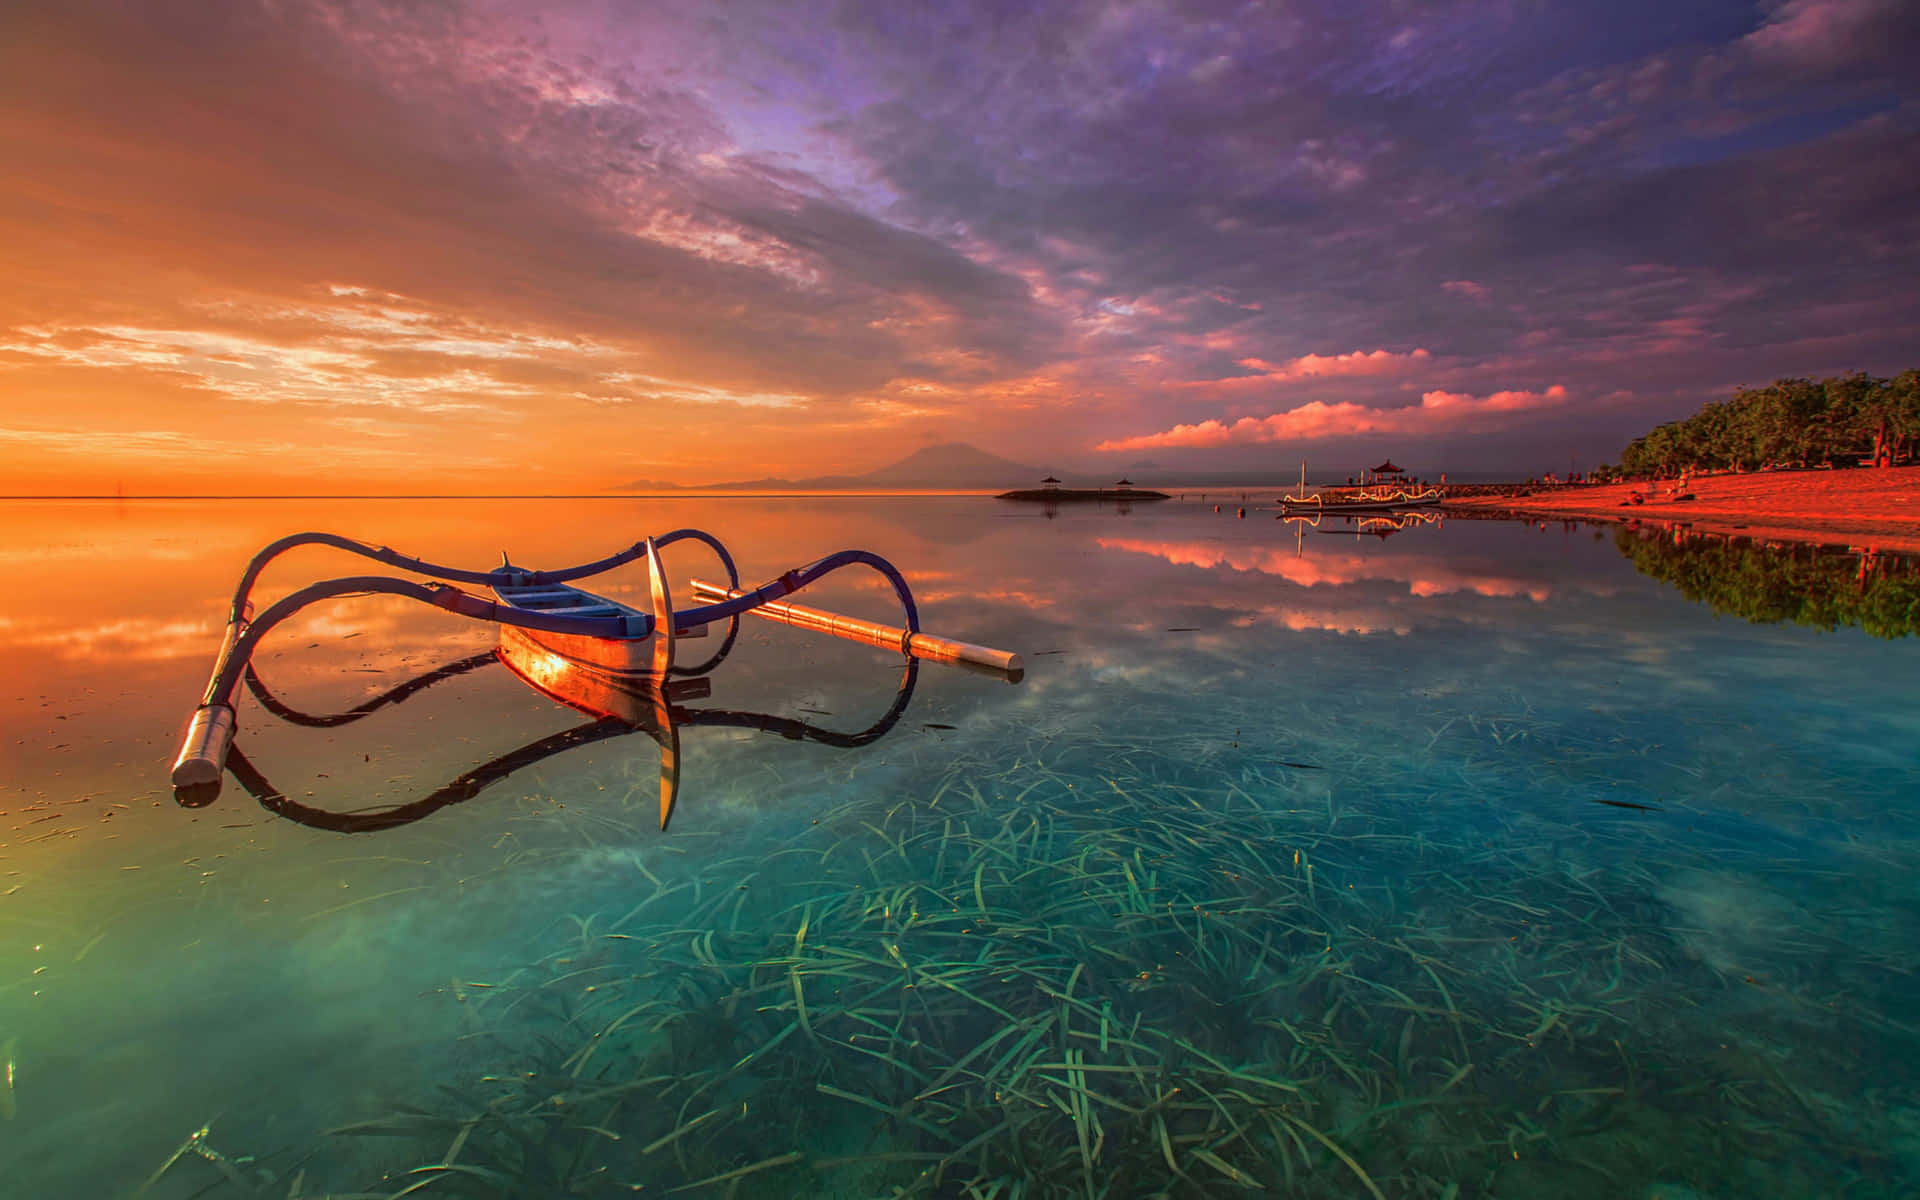 A breathtaking view of Bali's lush landscapes and crystal clear water